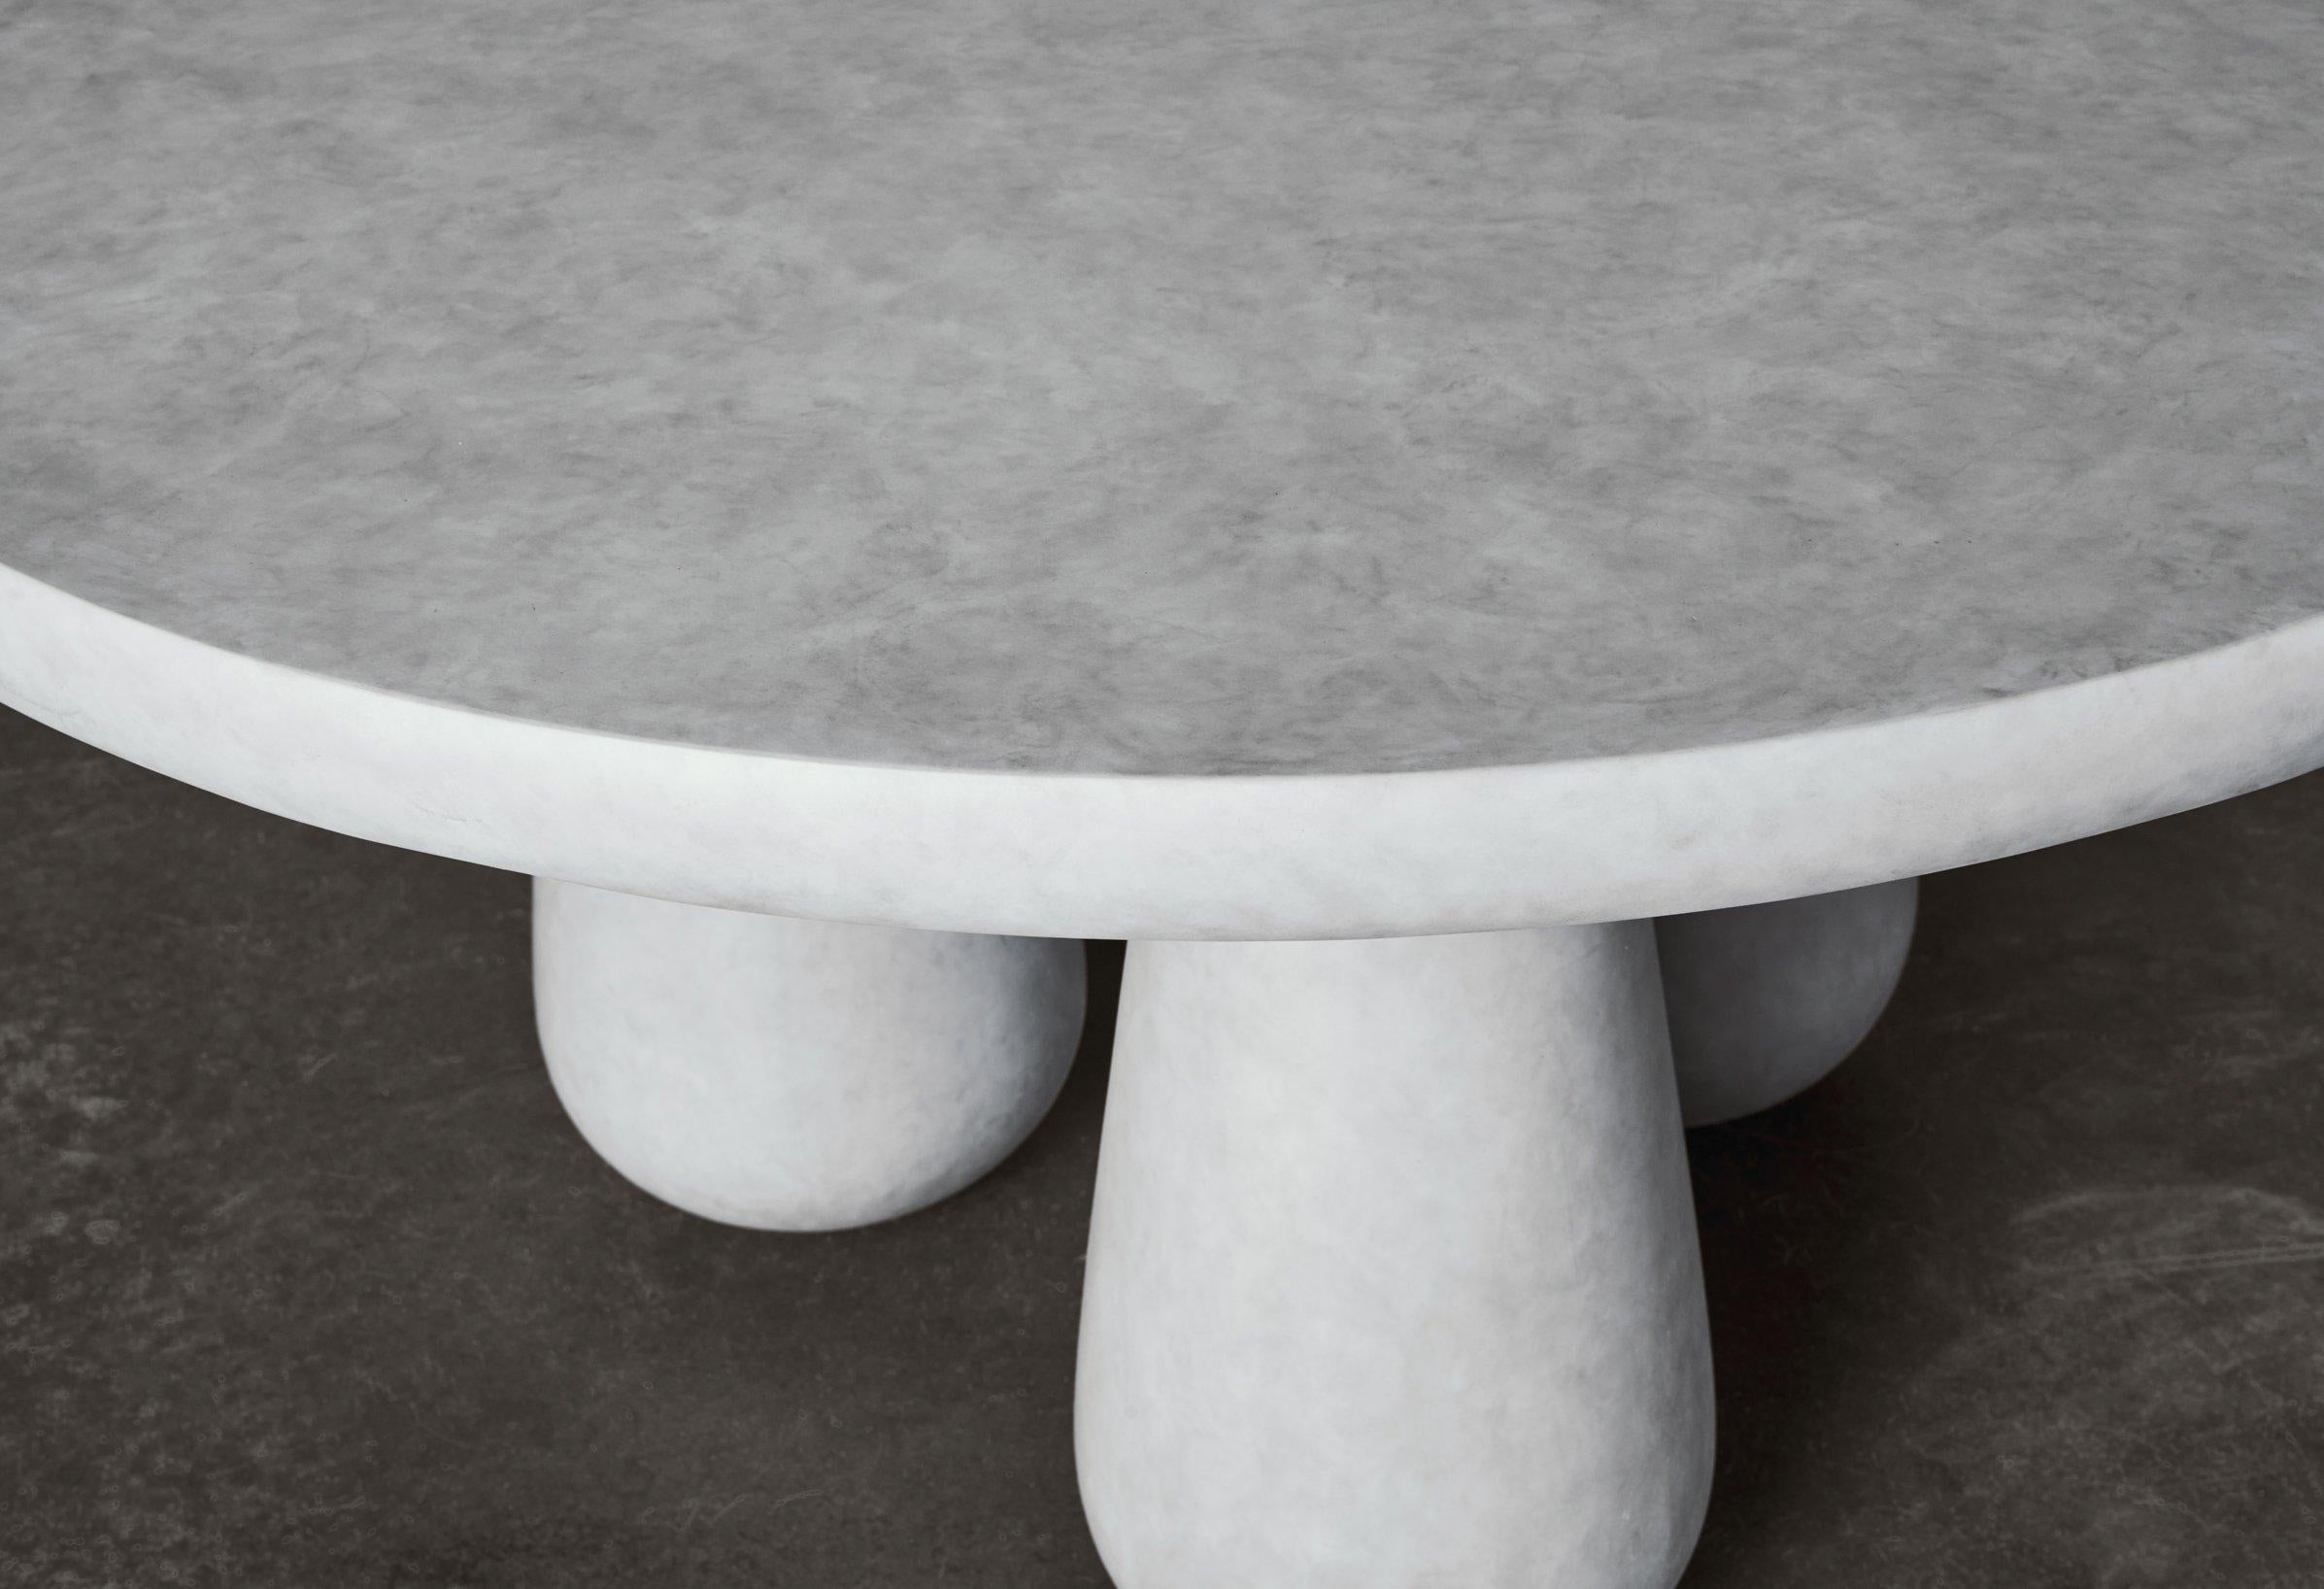 DD Round table is a modernist dining table. The table has a unique finish that is reminiscent of concrete, but under the grey surface hides a frame of beech and plywood. 
The concrete finish is achieved by painting the table in 7 different steps to